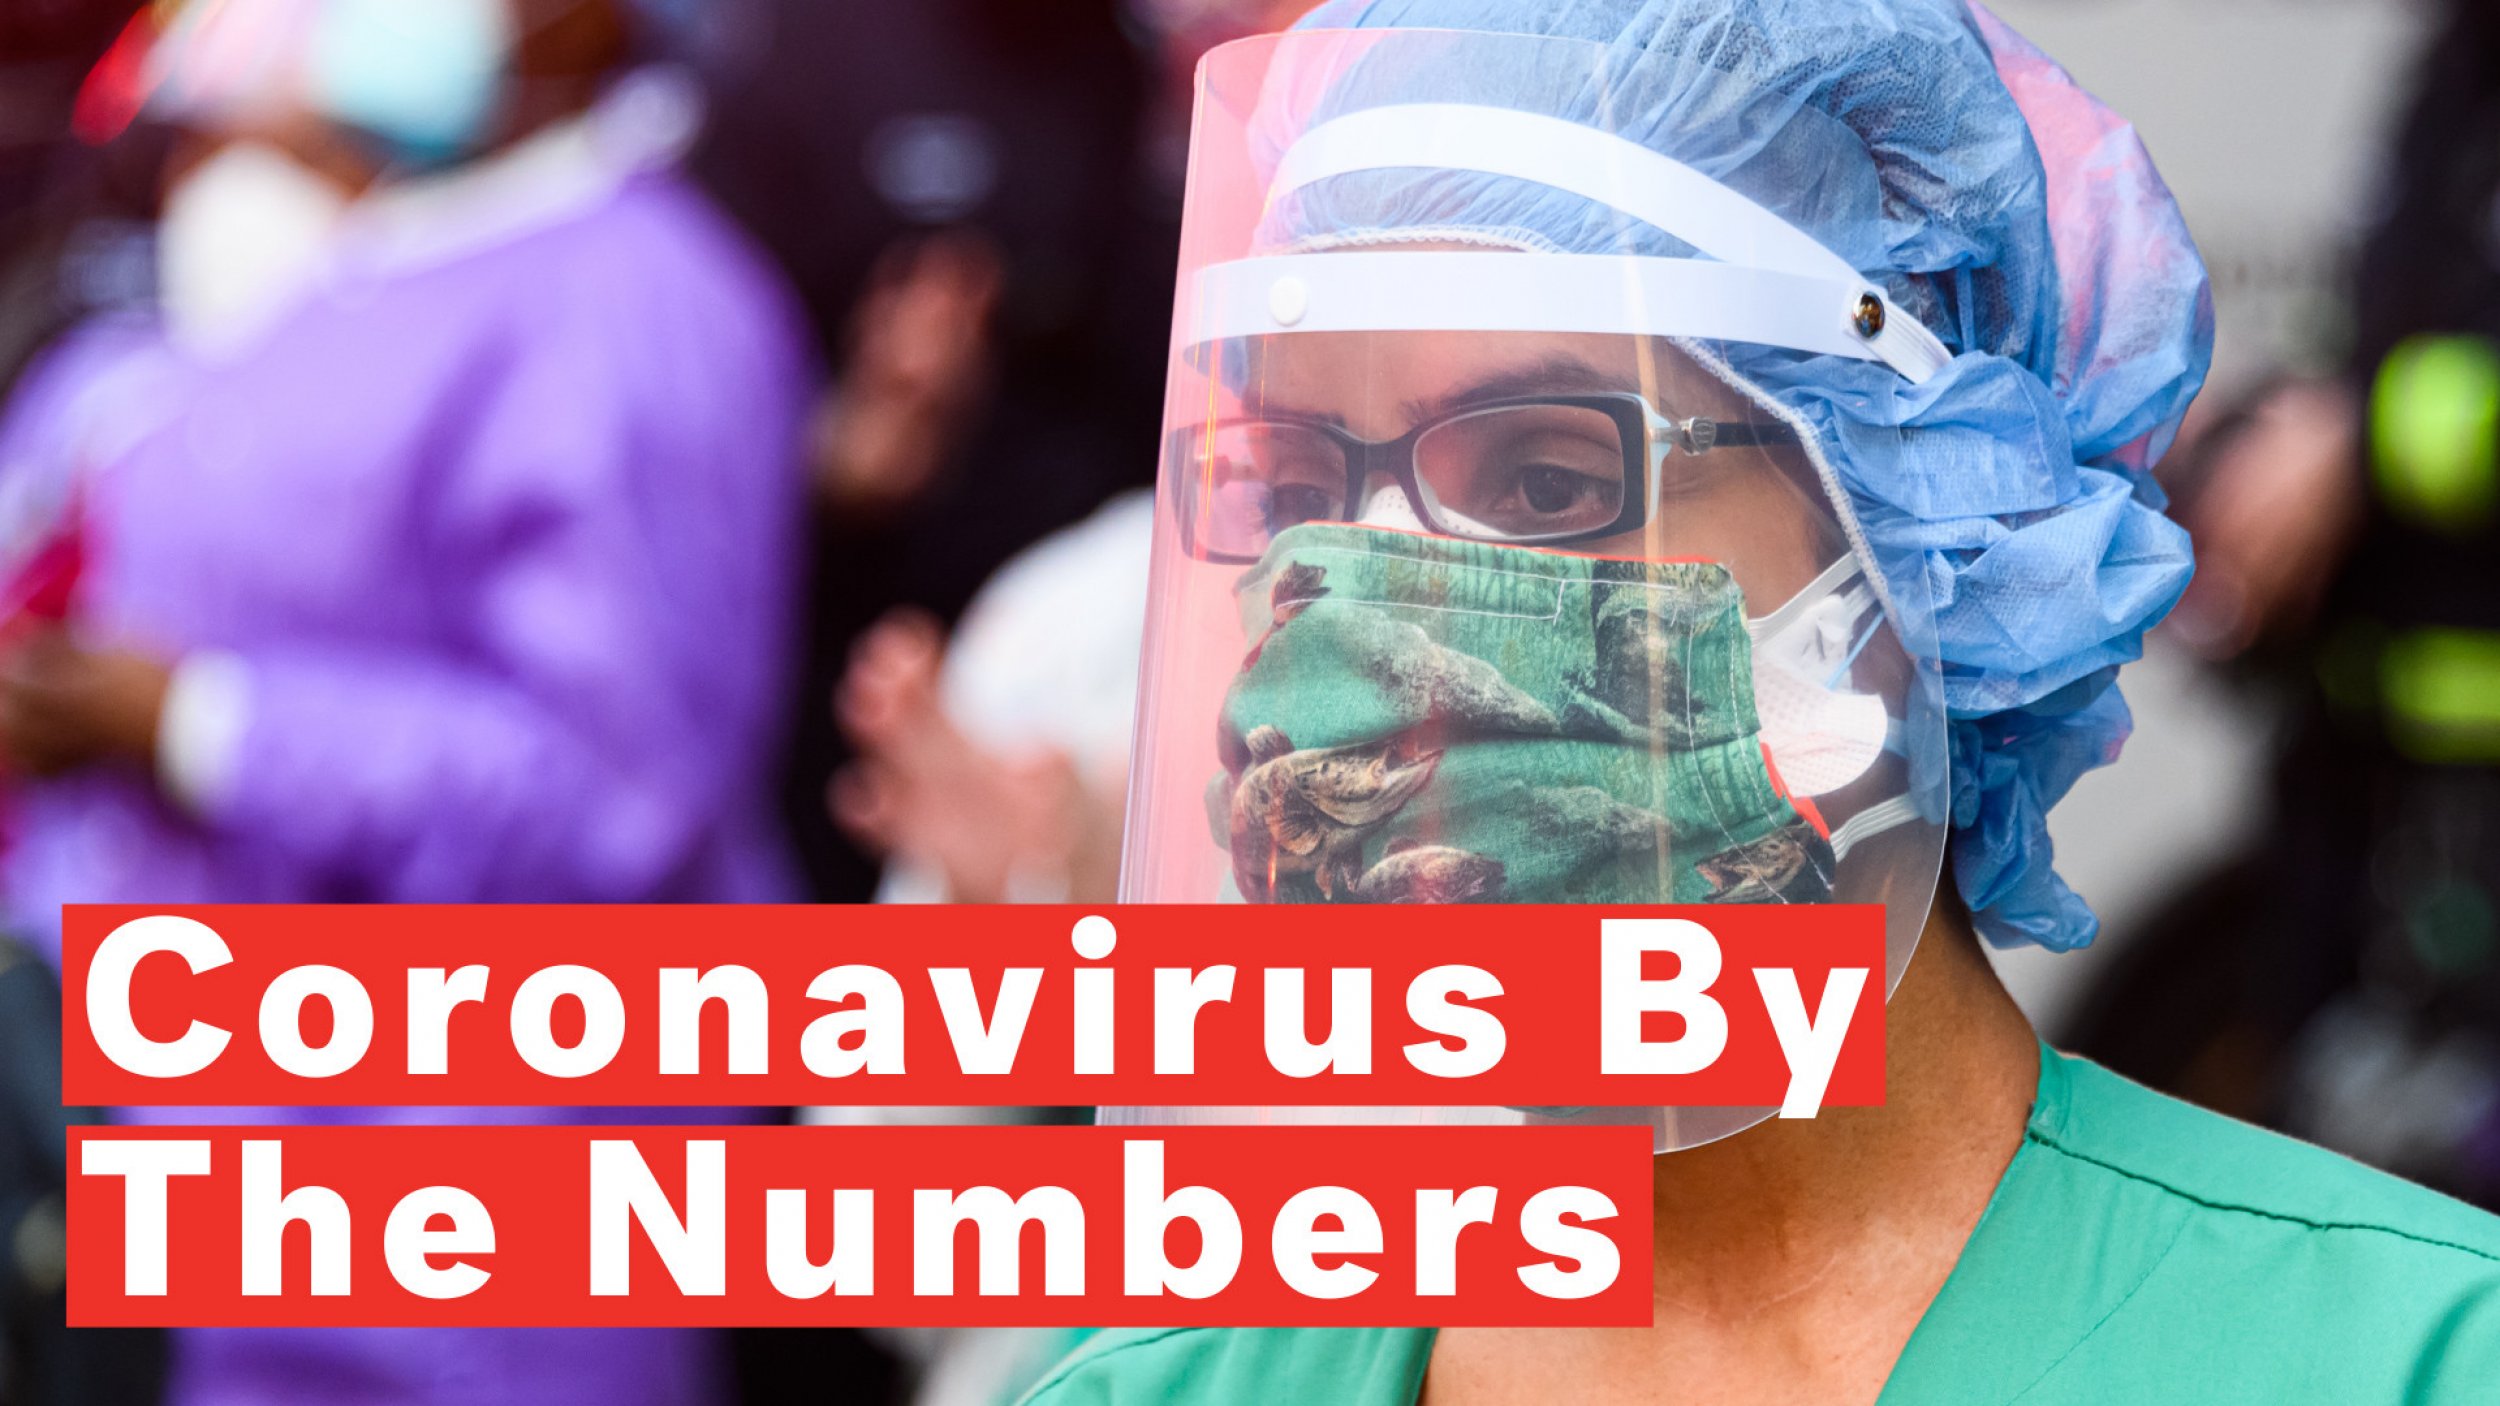 The Coronavirus By the Numbers Covid-19 Cases Reach Over 2.7  Million Worldwide While Death Toll Tops 195,313